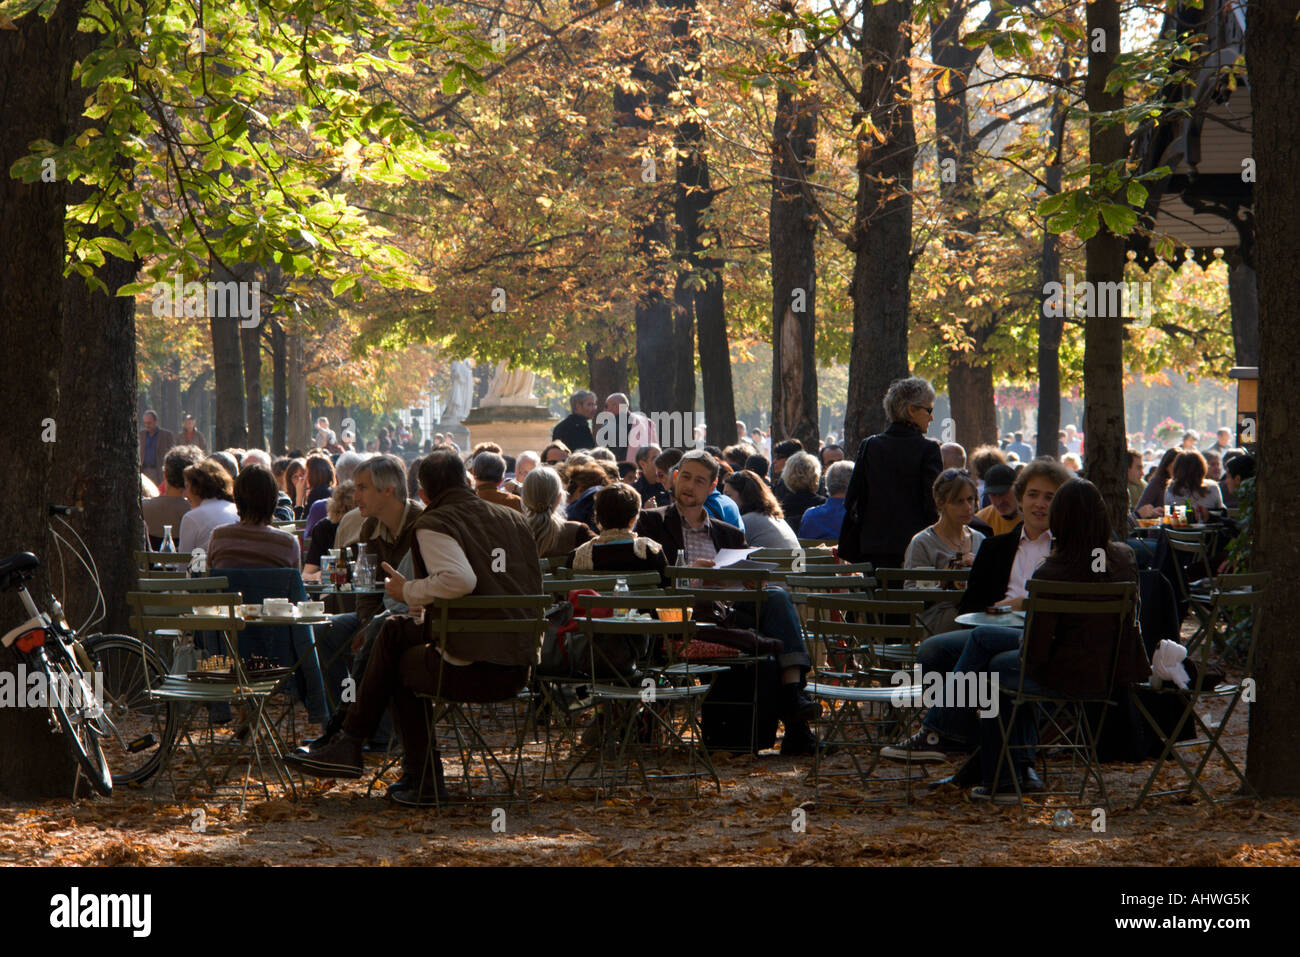 Outdoor Cafe in Jardin du Luxembourg Paris France Stock Photo